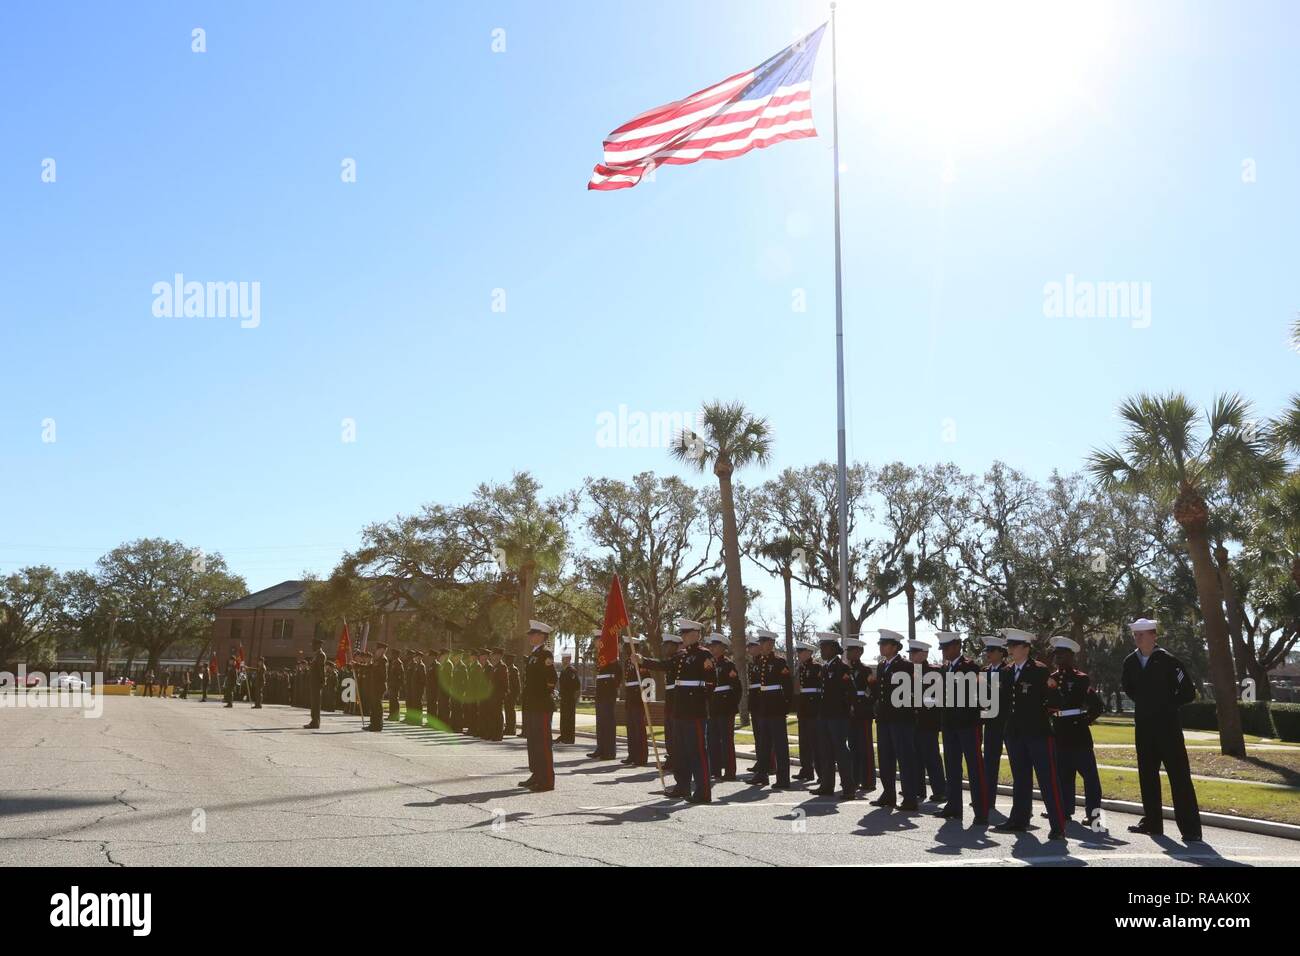 U.S. Marines stationed on Marine Corps Recruit Depot Parris Island (MCRD PI) stand in formation during a relief and appointment ceremony at the General’s Building on MCRD PI, S. C., Jan. 13, 2017. Sgt. Maj. Angela M. Maness retired after 30 faithful years of service and was relieved of her duty as MCRD PI/Eastern Recruiting Region Sergeant Major by Sgt. Maj. Rafael Rodriguez. Stock Photo